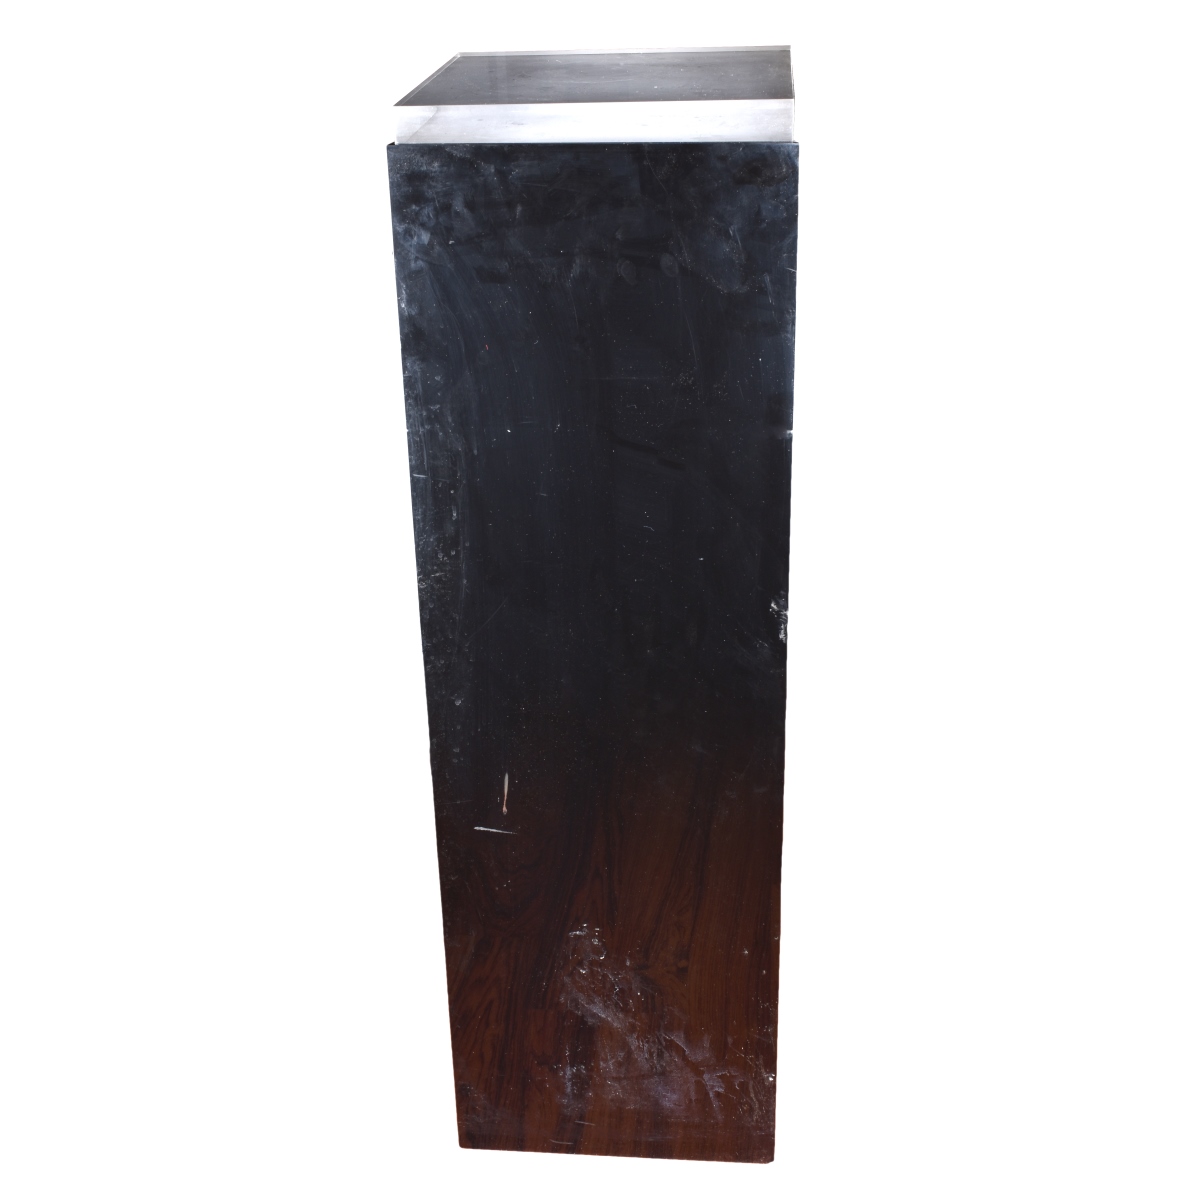 Acrylic Black Pedestal, Clear Top. Electric